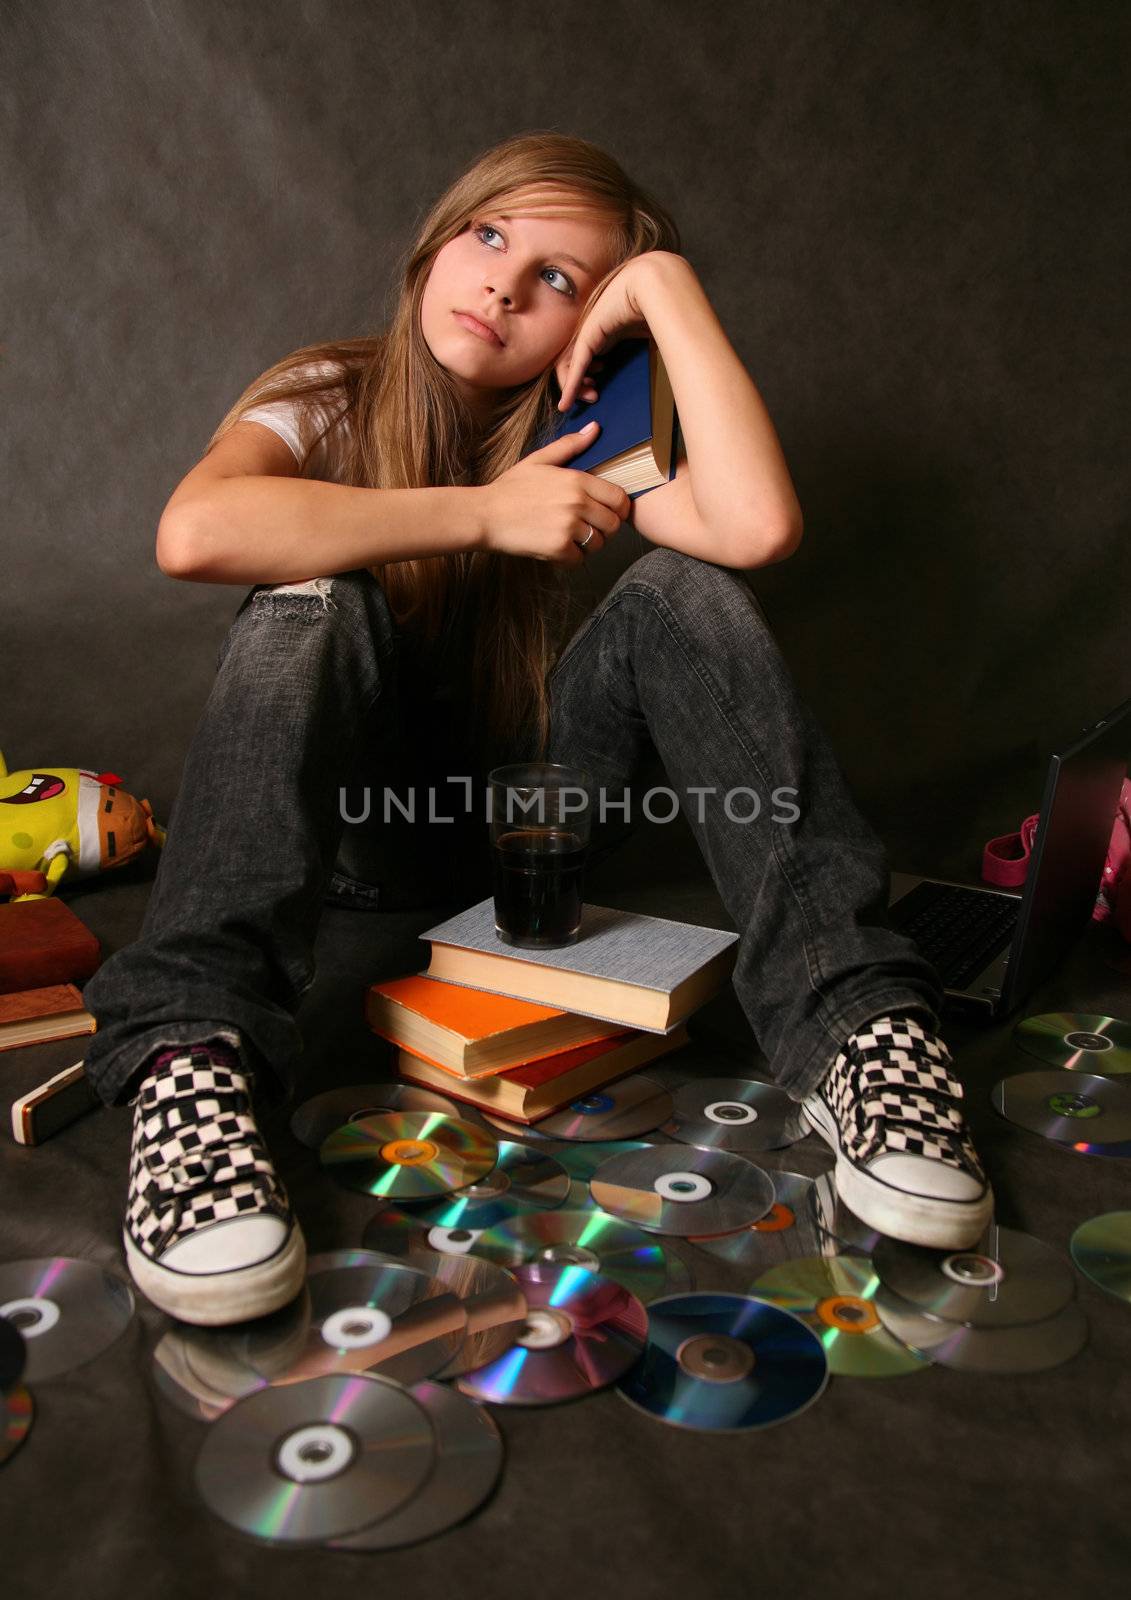 The young girl reads the book